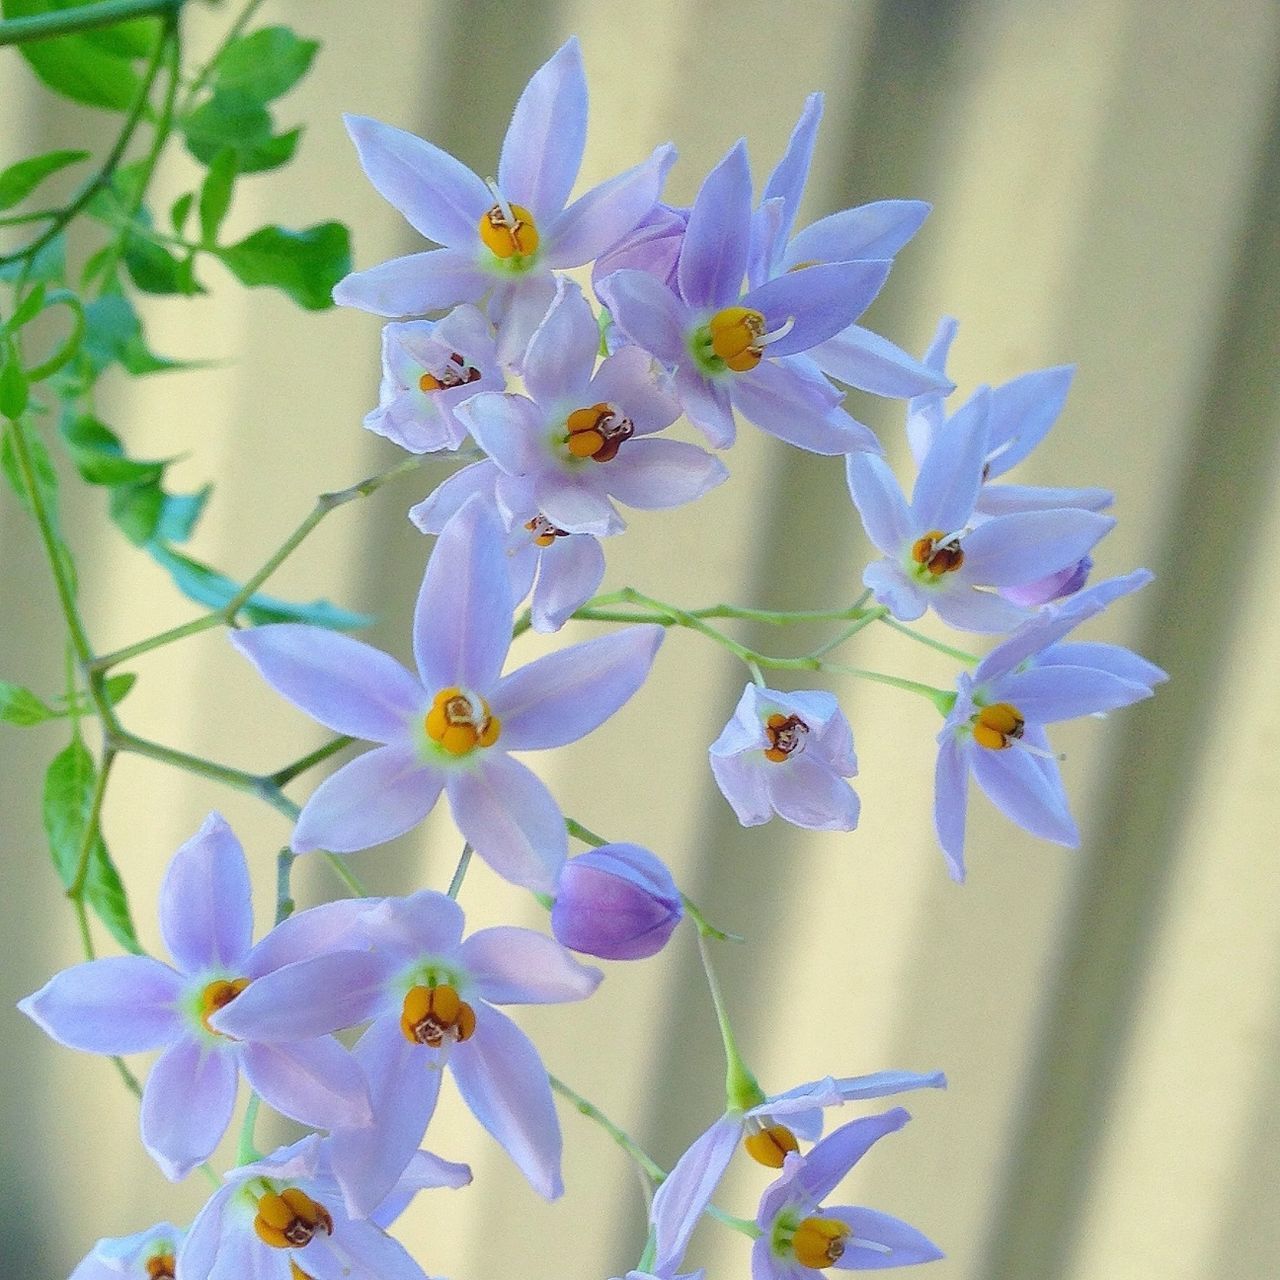 flower, freshness, petal, fragility, growth, purple, beauty in nature, flower head, close-up, nature, plant, indoors, blooming, focus on foreground, blue, stem, in bloom, no people, leaf, day